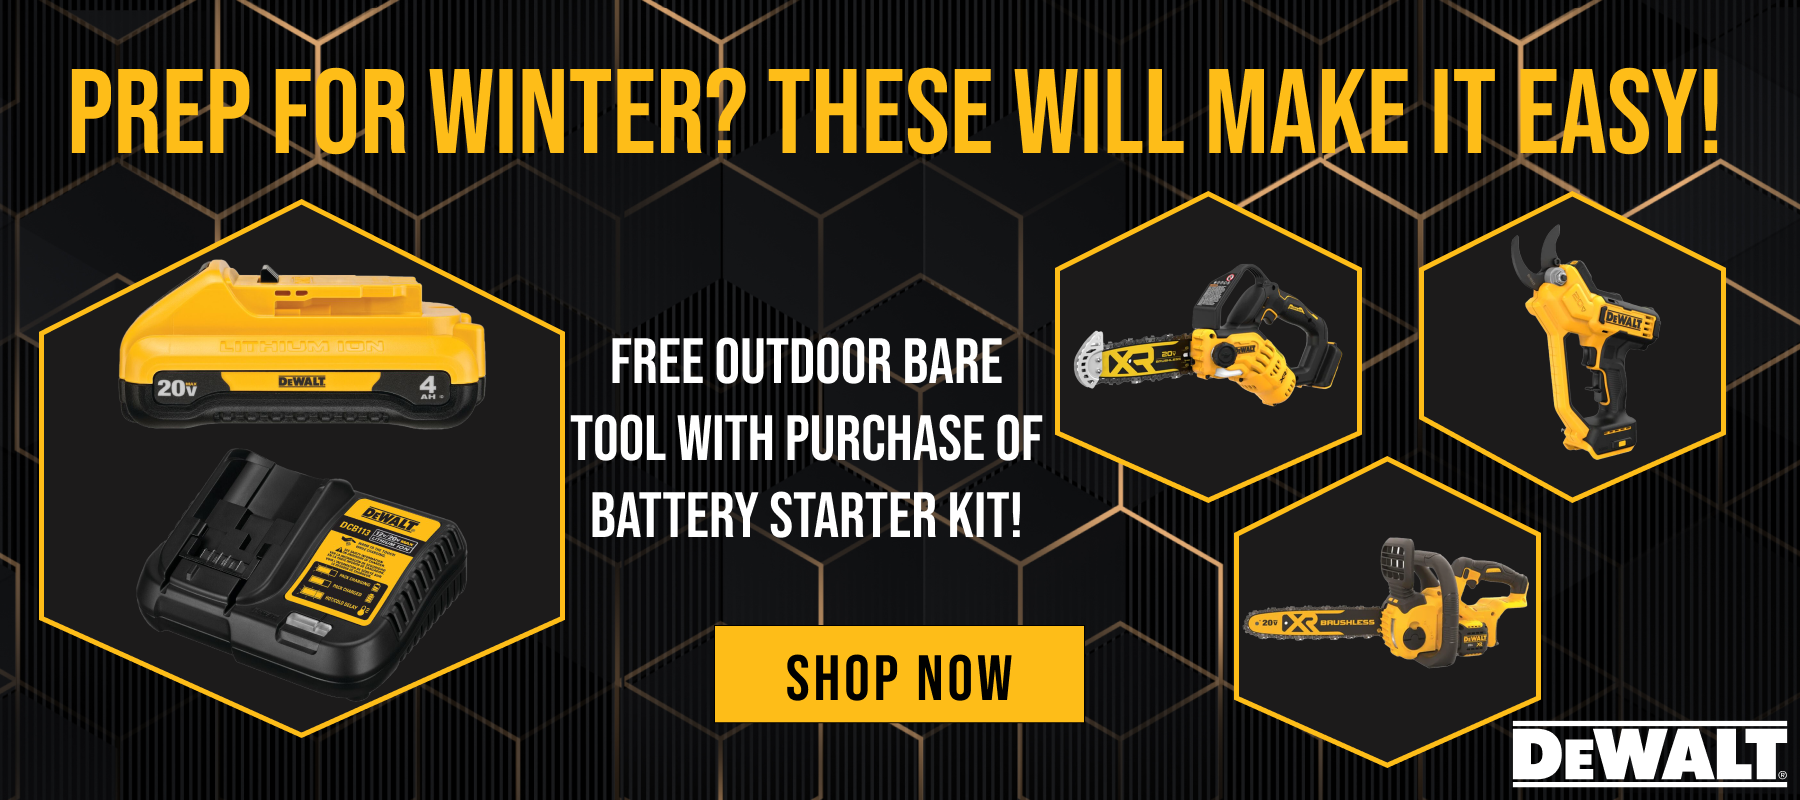 DeWalt // Prep for Winter? These Will Make it Easy! // Free Outdoor Bare Tool with Purchase of Battery Starter Kit! // SHOP NOW